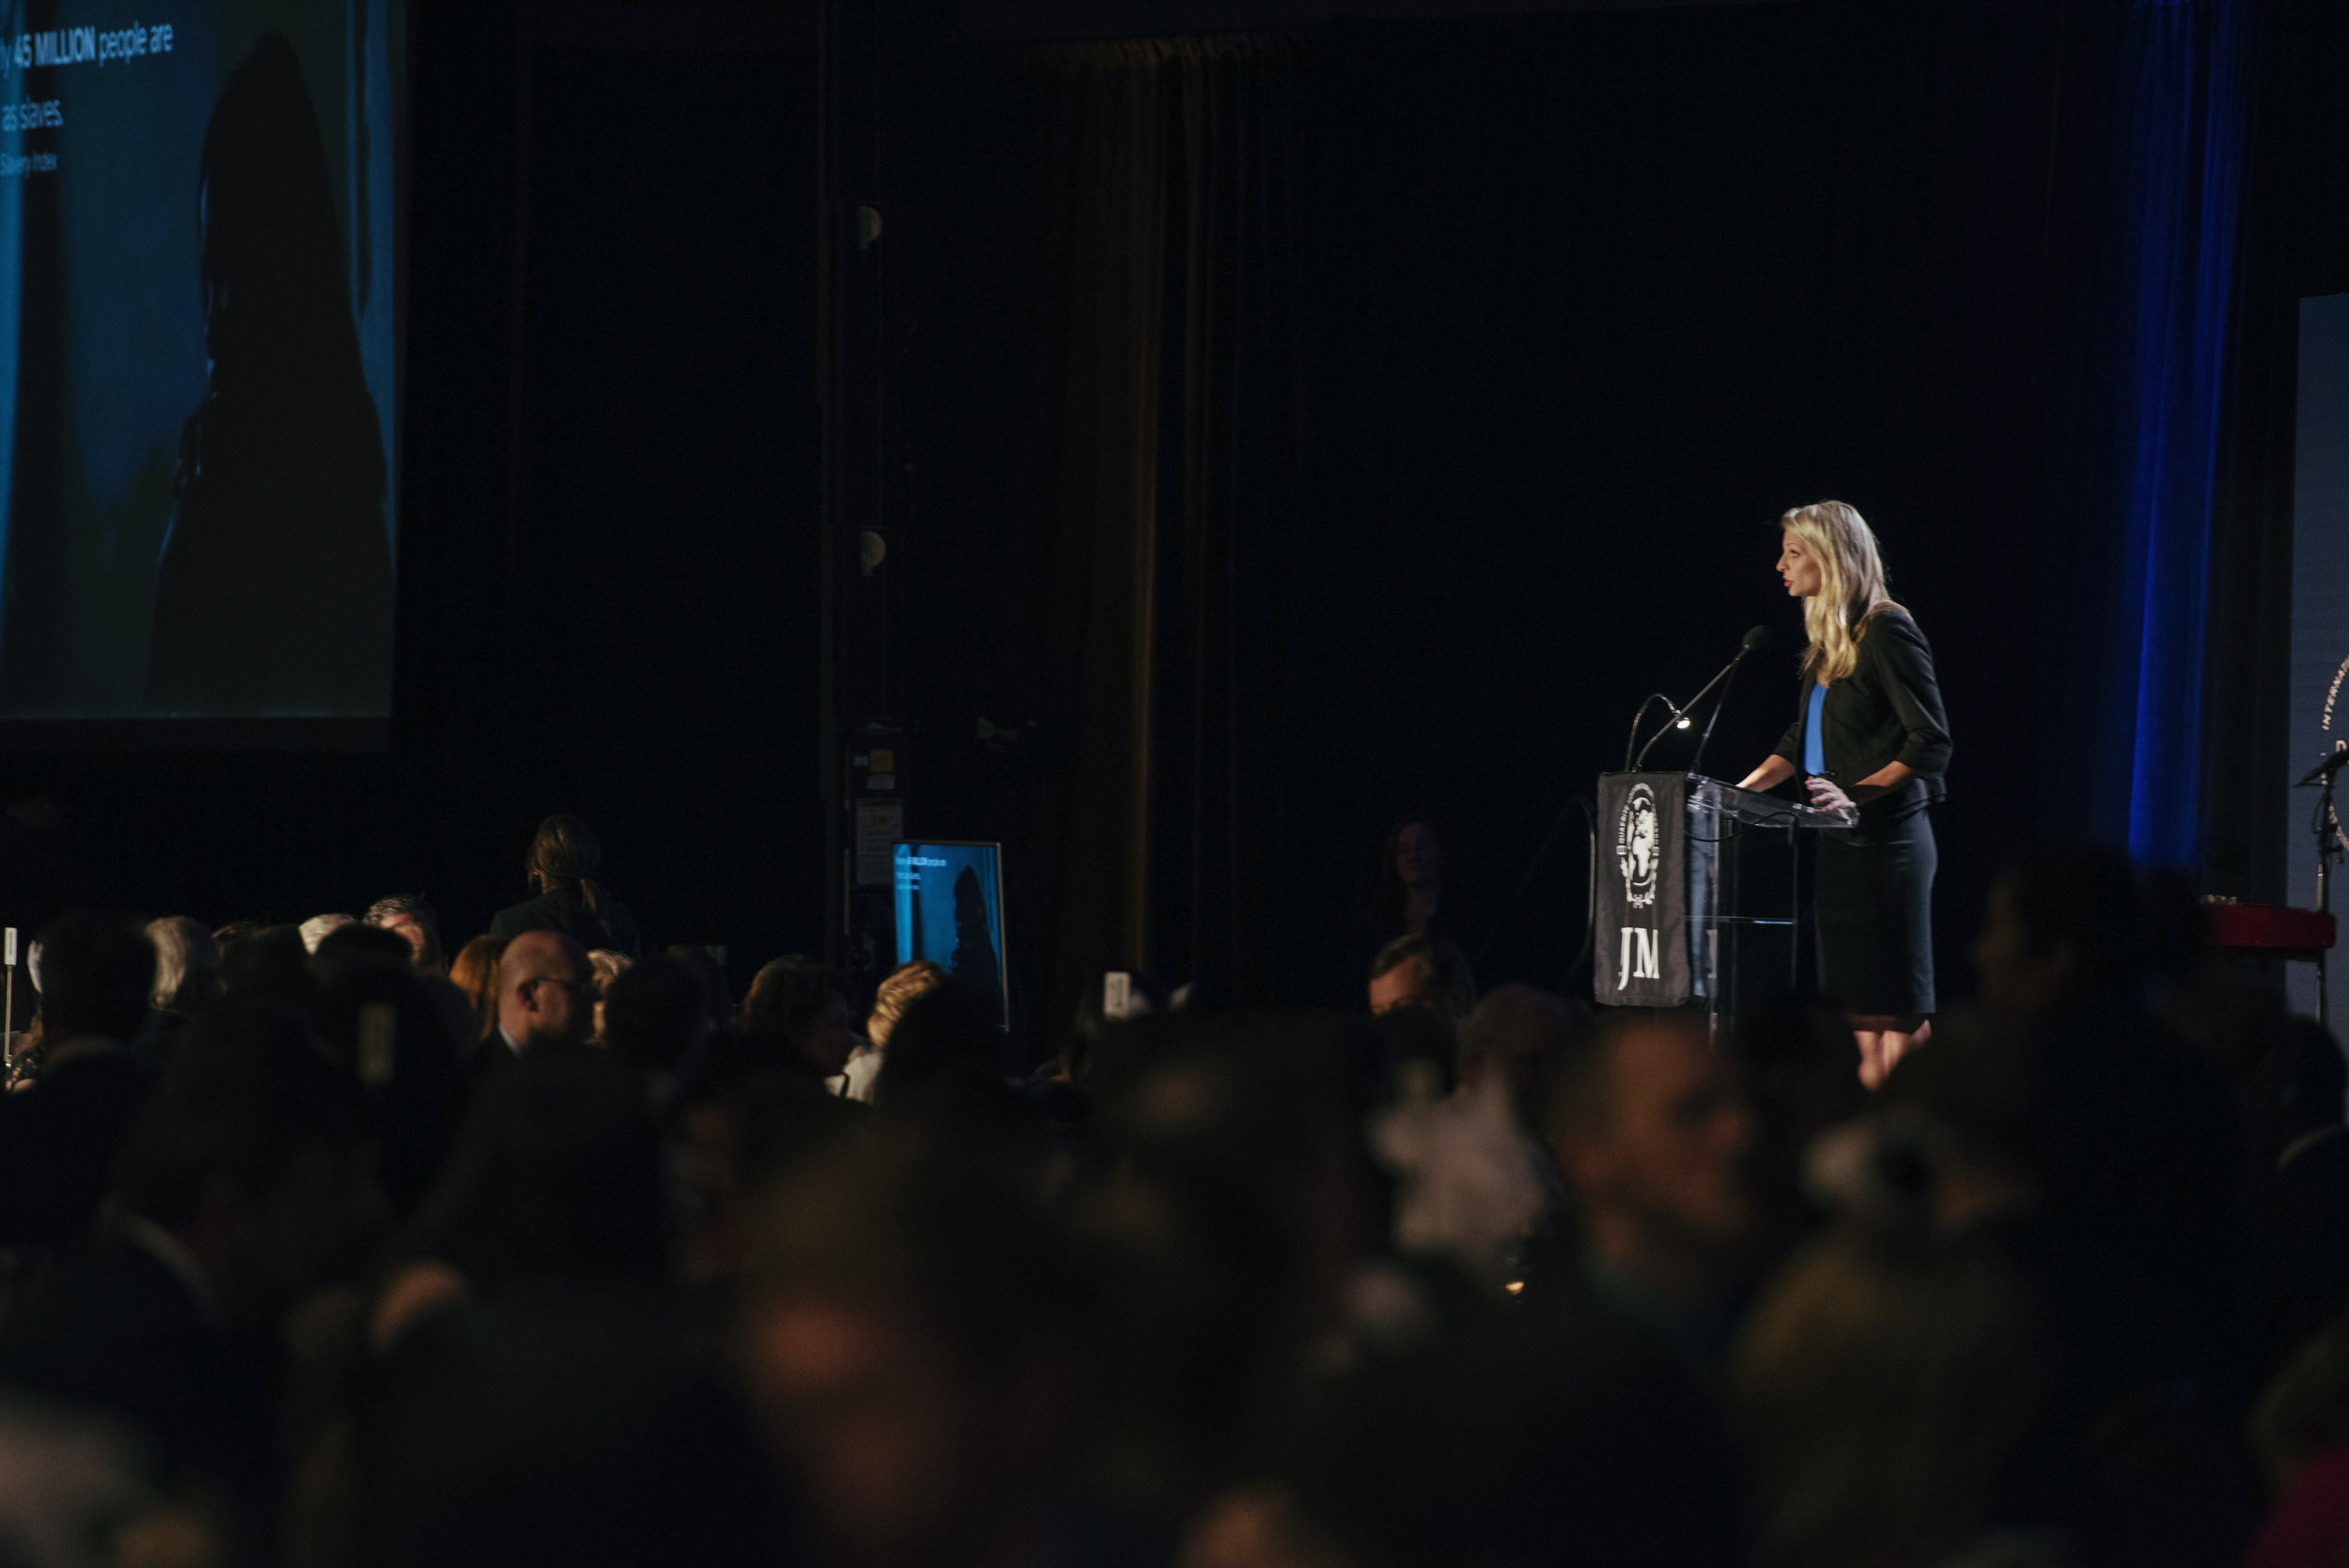 Mallory provides an overview of IJM’s work at the 2017 Dallas Benefit Dinner at the Omni Hotel Downtown.